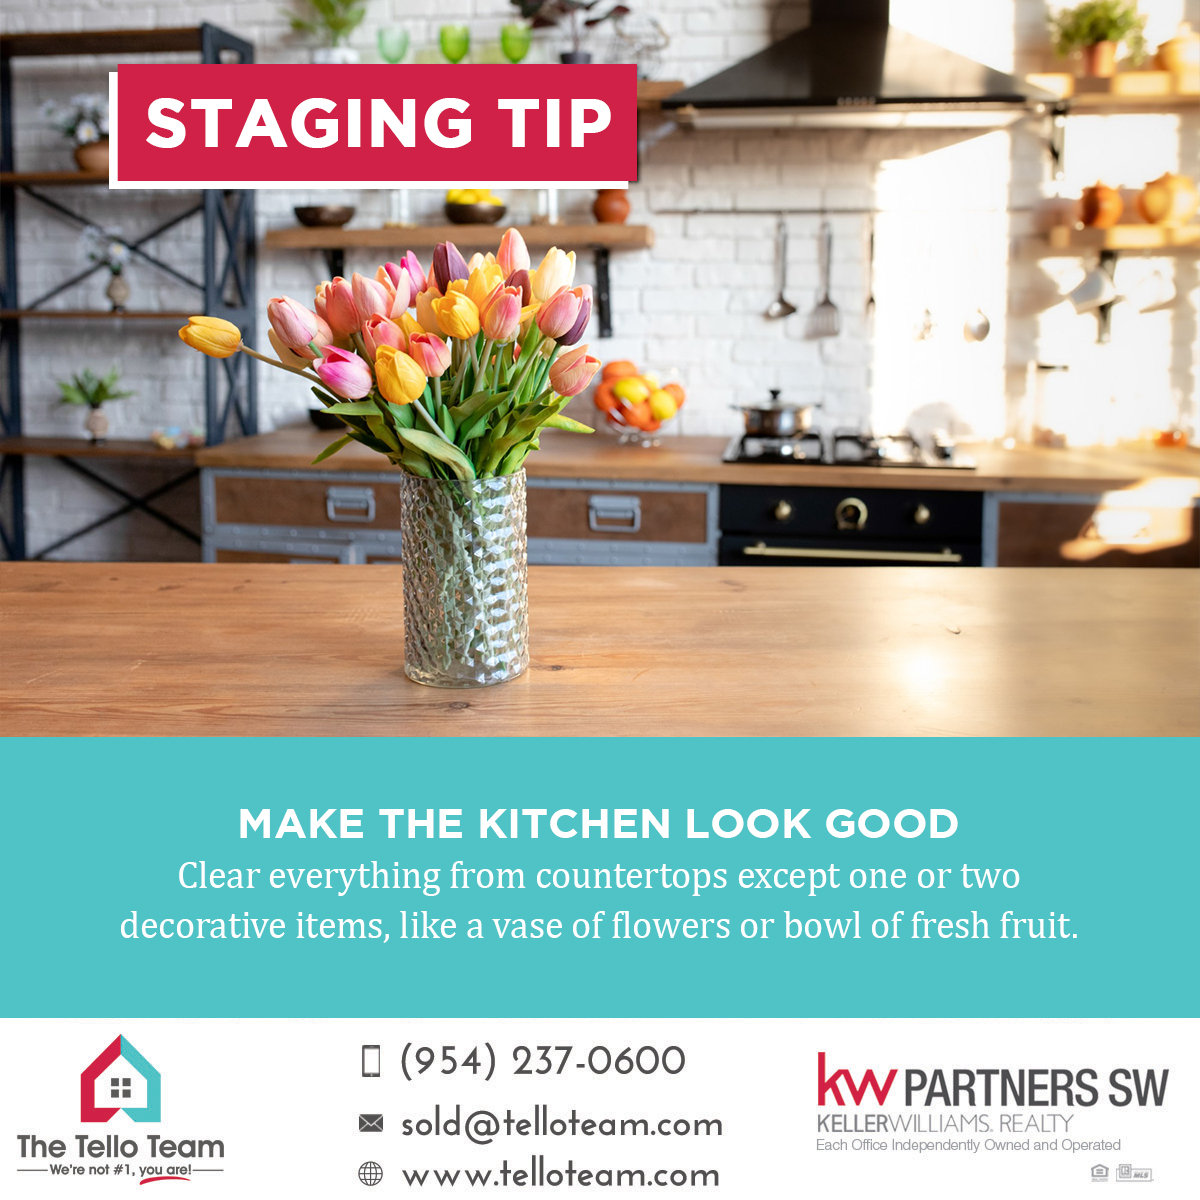 #StagingTip Make the kitchen look good!

Looking to sell your home? 📲+1 954-237-0600

#stagingsells #stagingtips #realestatebroker #realestatemiami #realestateflorida #floridarealtor #browardcountyrealestate #browardcountyrealtor #browardcountyfl #miamidadecounty #thetelloteam